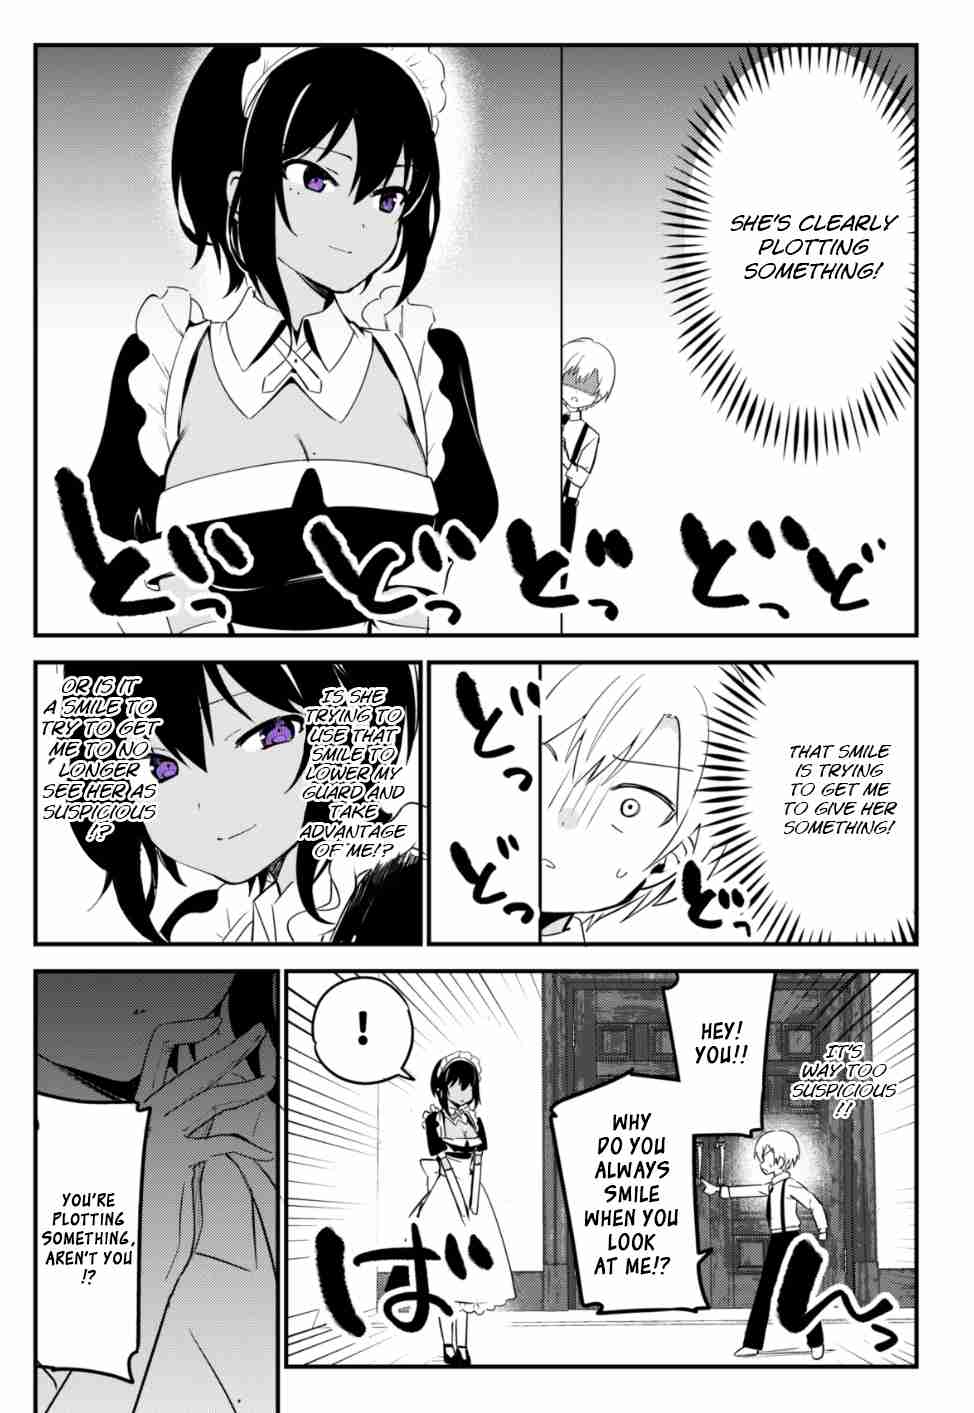 My Recently Hired Maid Is Suspicious (Webcomic) Ch. 7